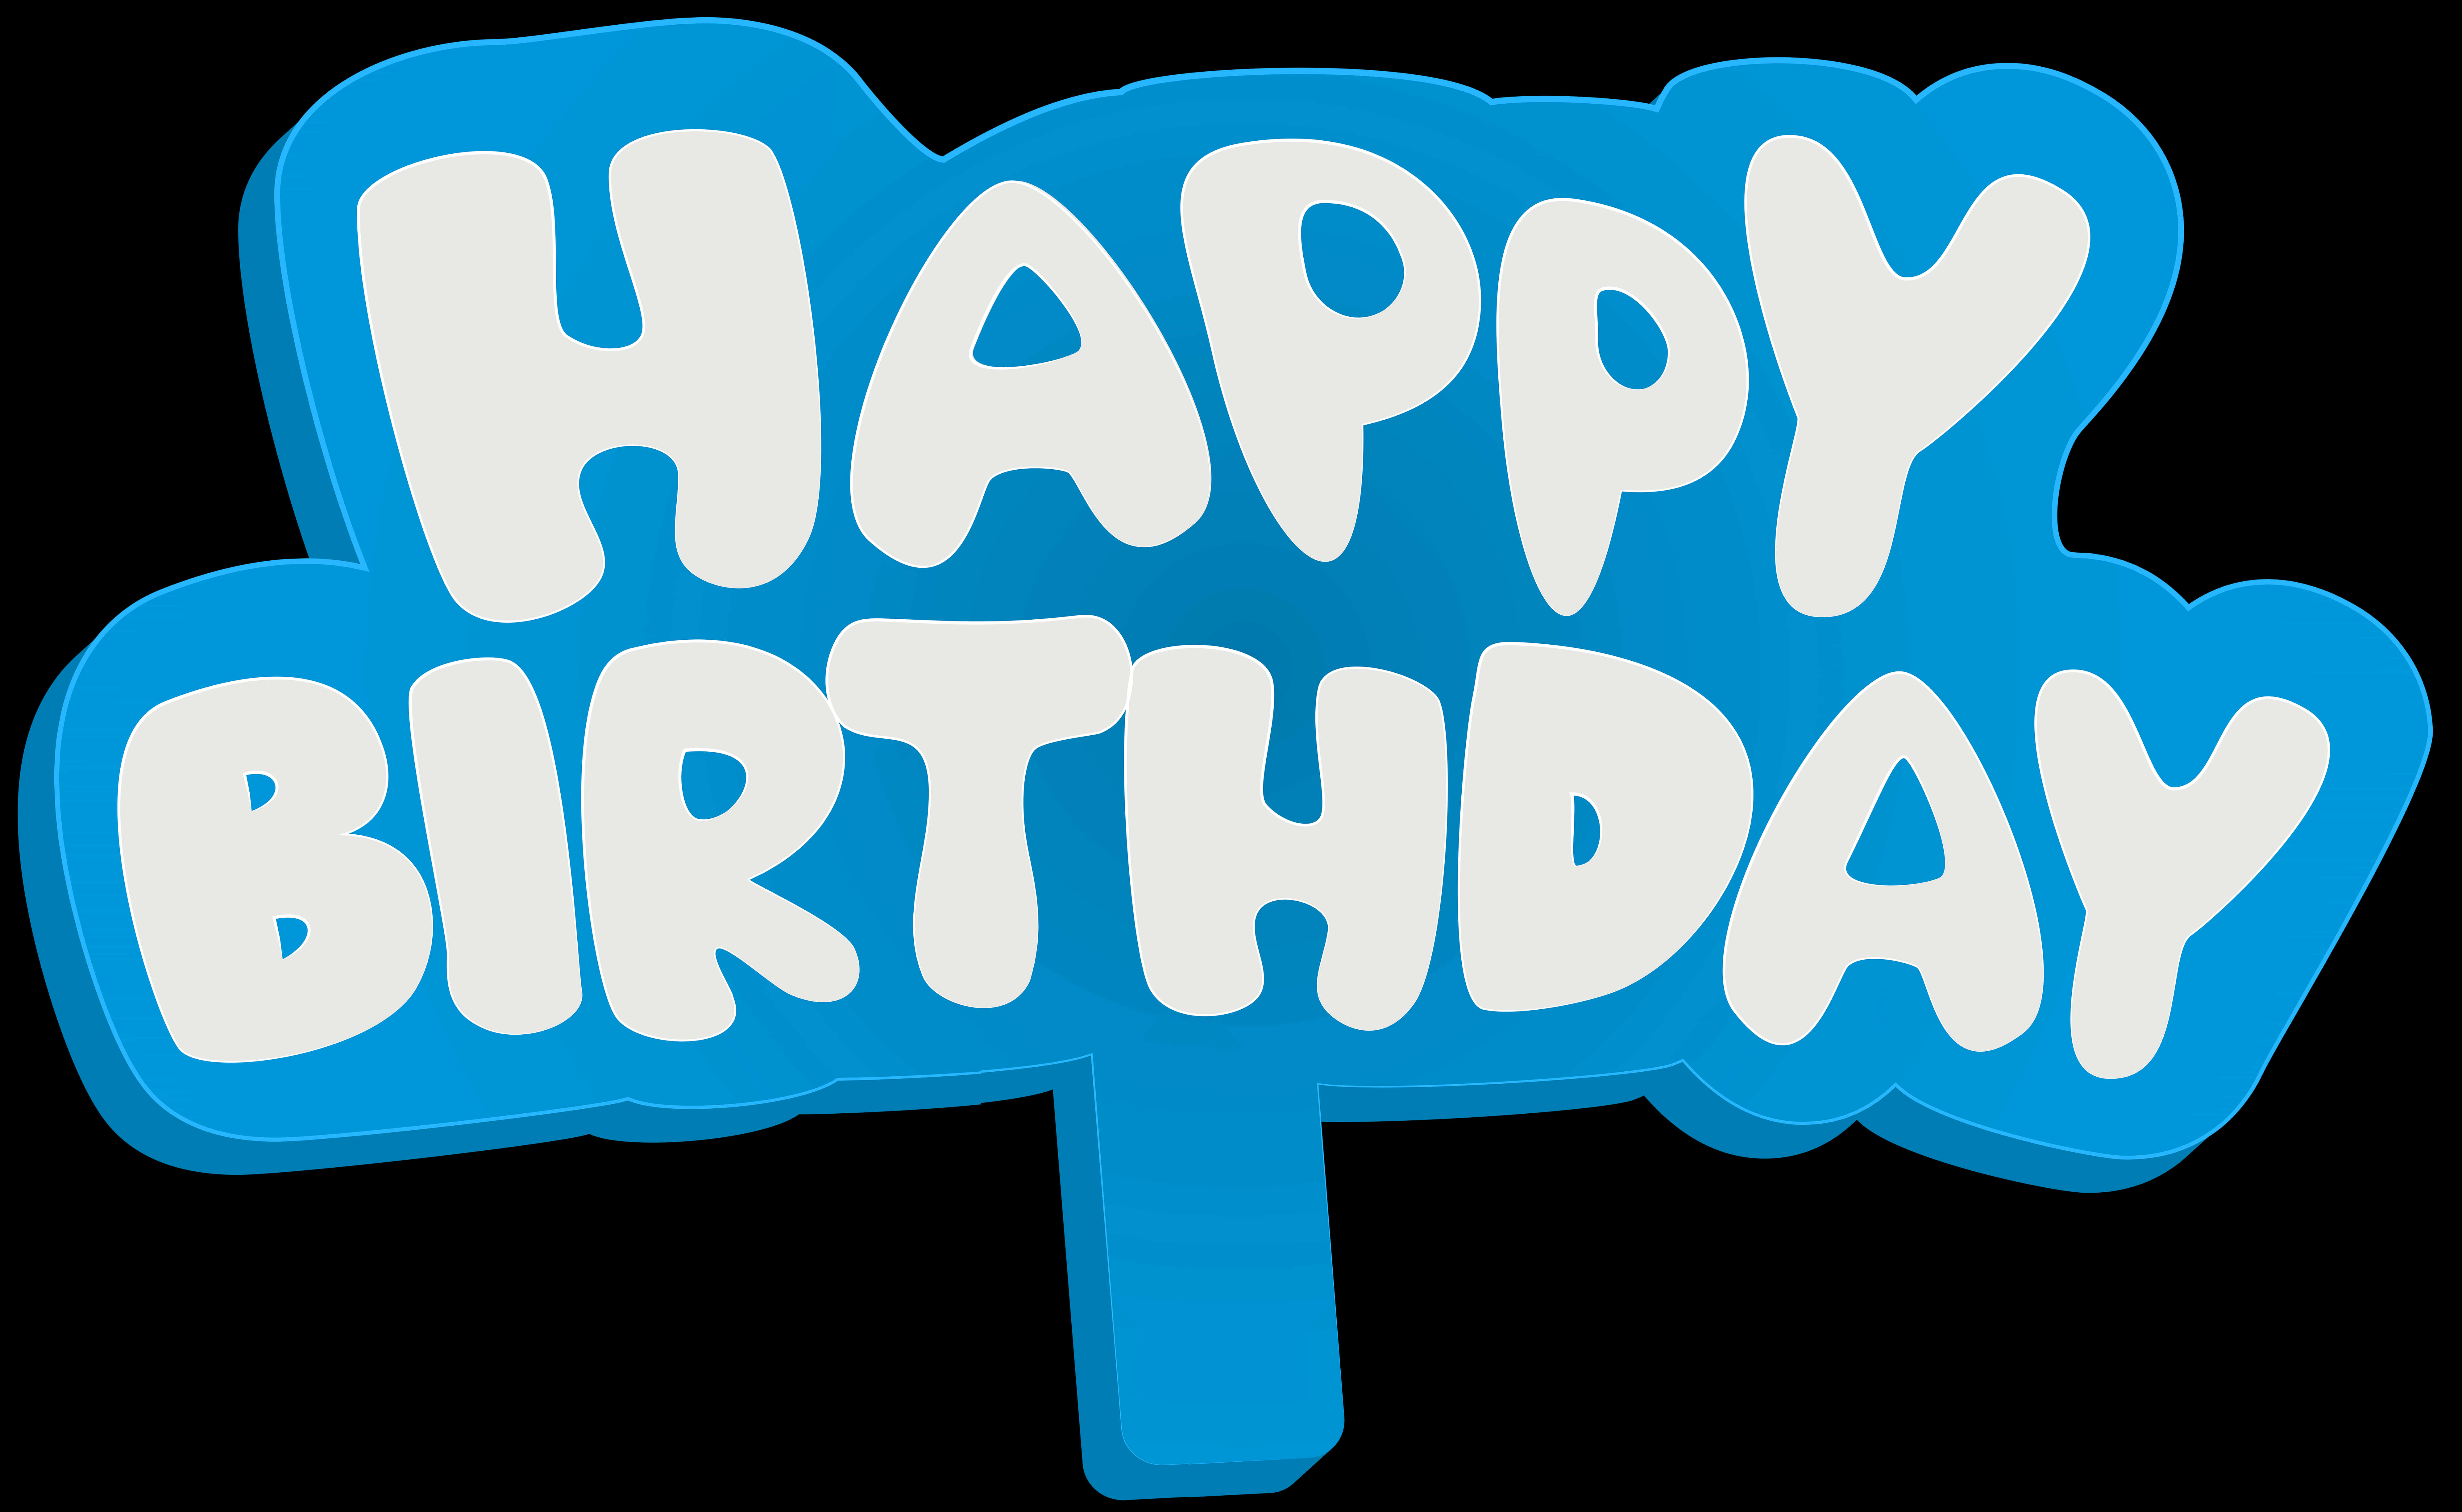 Blue Happy Birthday Text Graphic PNG image